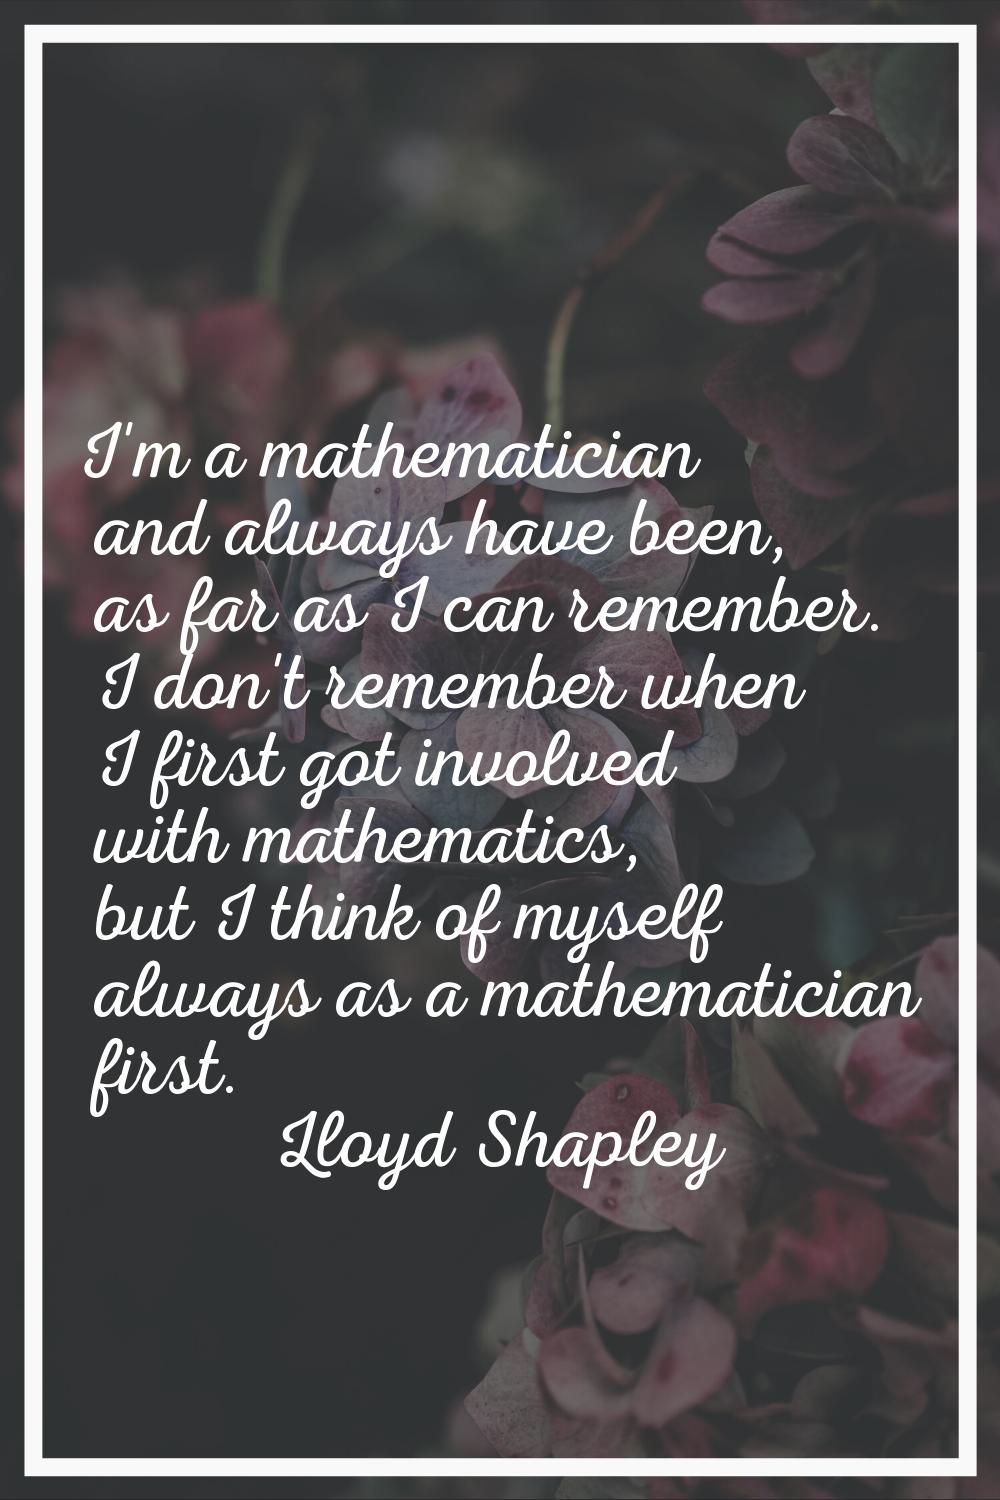 I'm a mathematician and always have been, as far as I can remember. I don't remember when I first g